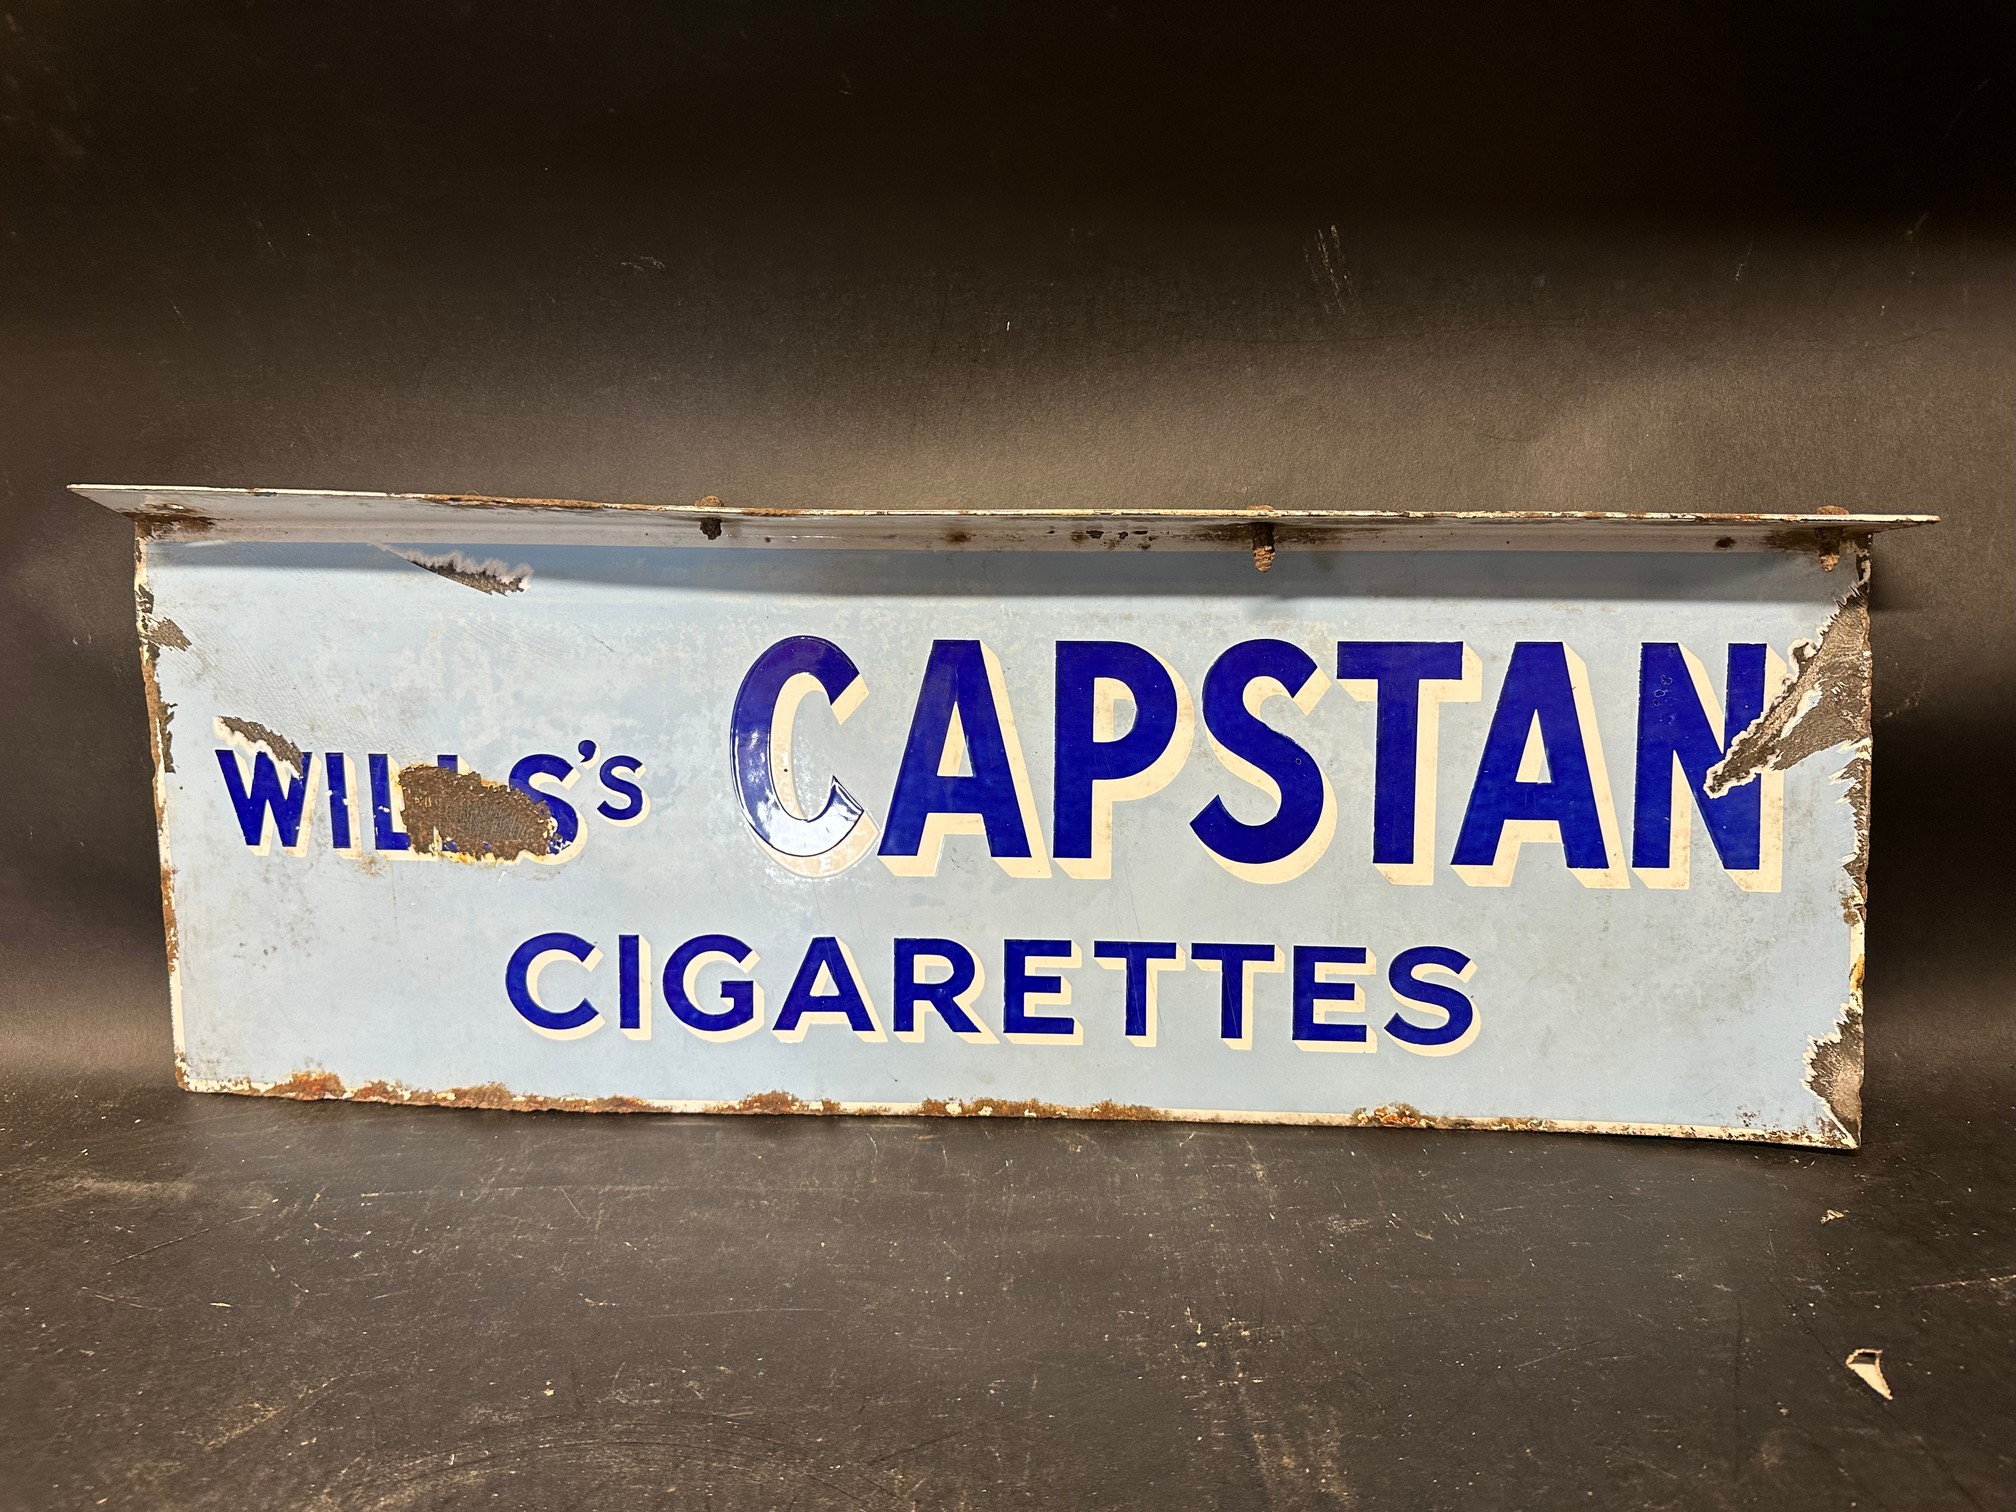 A Wills's Capstan Cigarettes double sided enamel advertising sign, unusually with hanging flange - Image 5 of 5